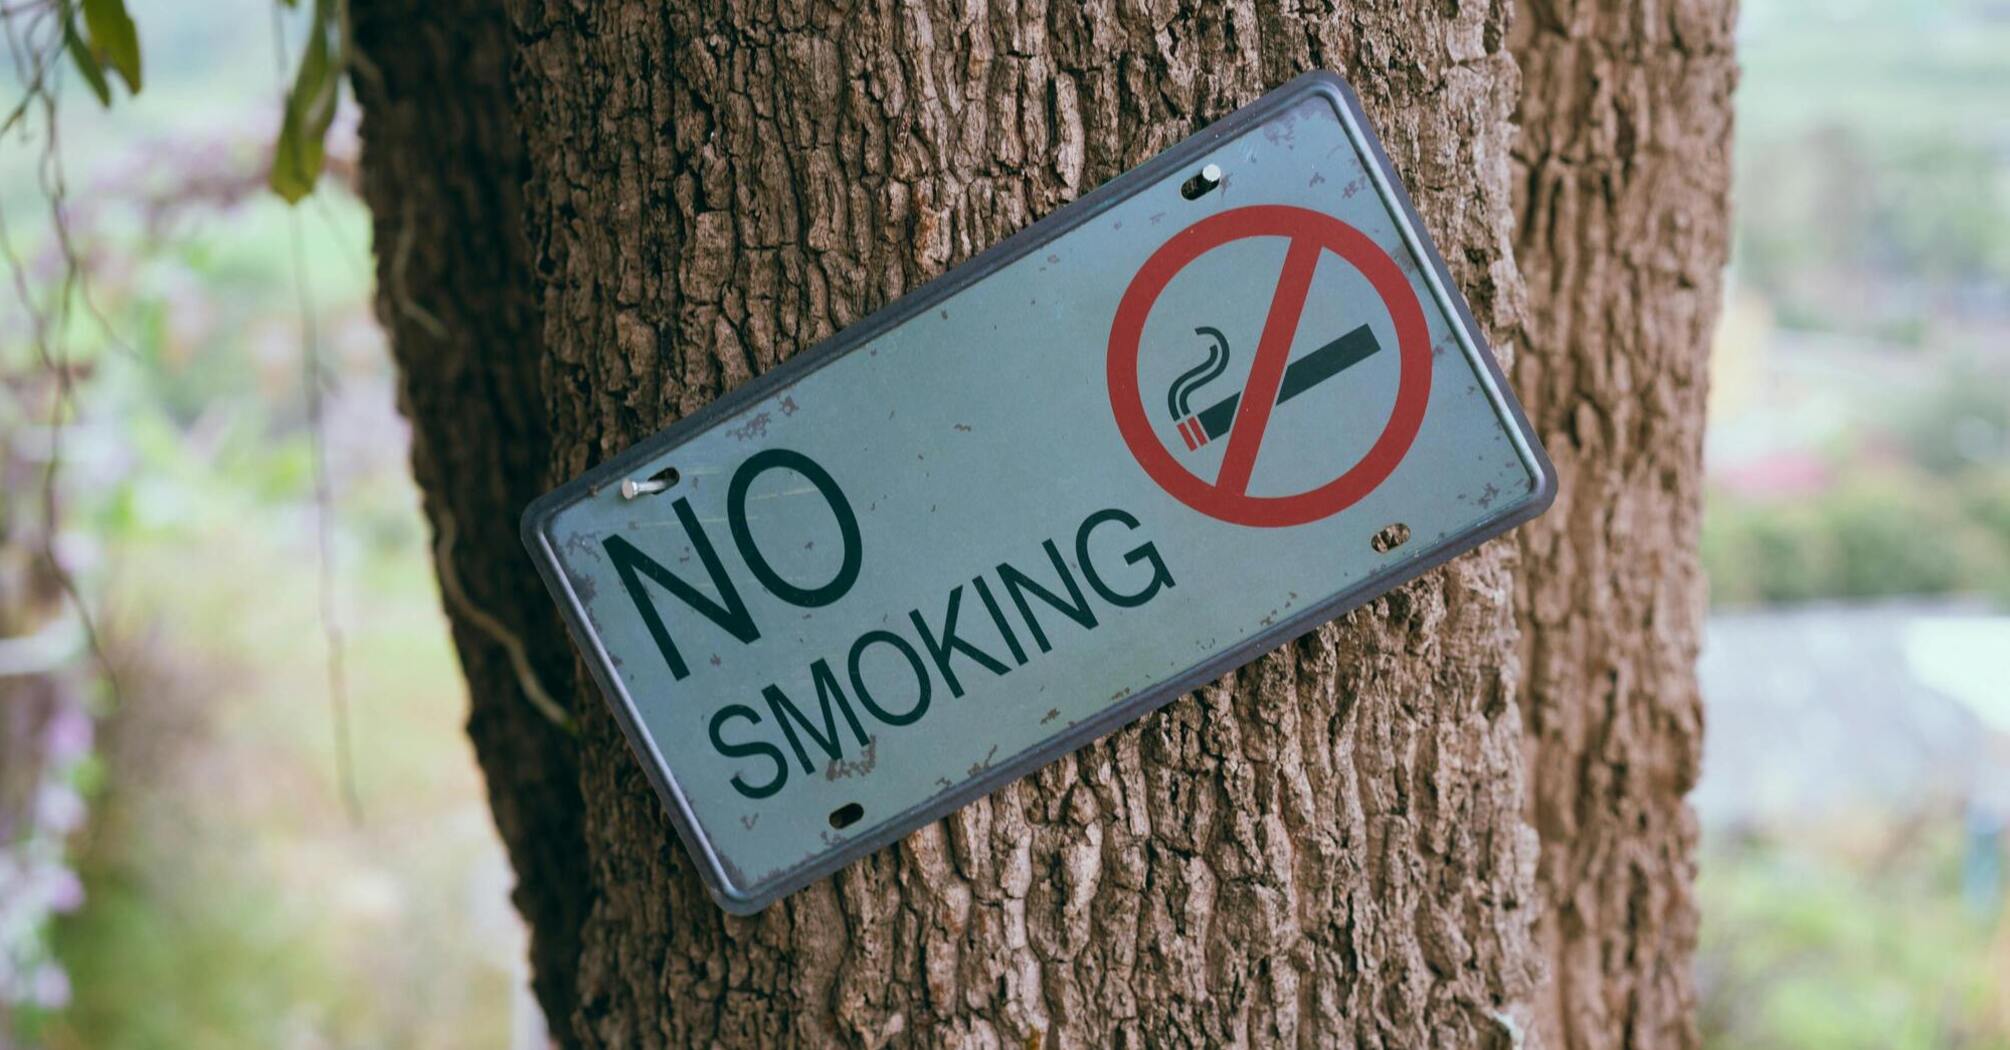 Taboo for avid smokers: smoking will be prohibited on beaches and in parks in France